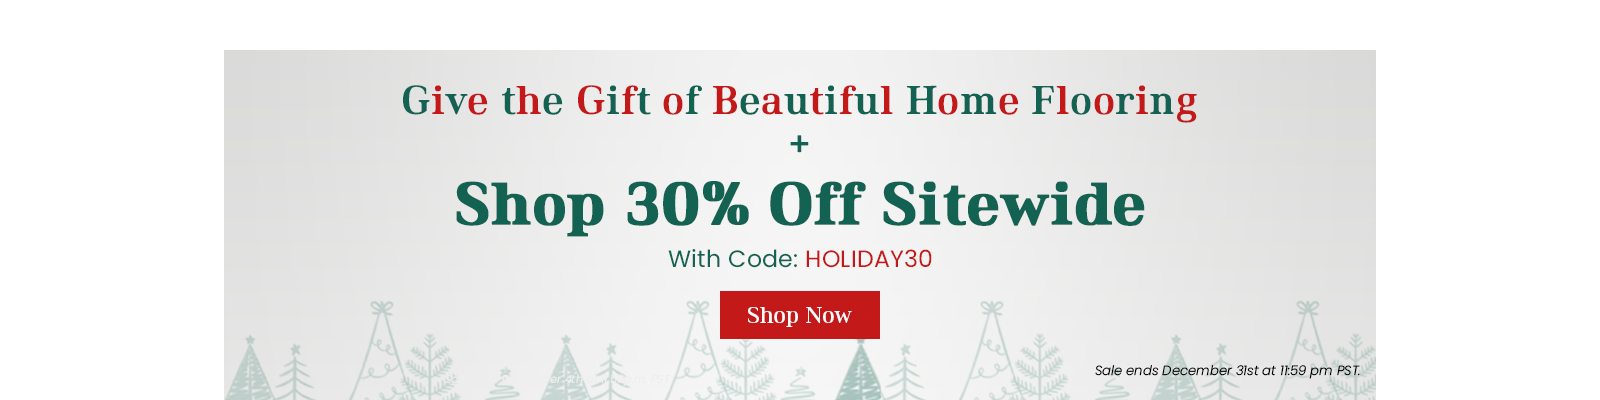 This Season, Give the Gift of Beautiful Home Flooring!  Shop 30 percent Off Sitewide with Code HOLIDAY30. Shop Now. Sale Ends December 31st